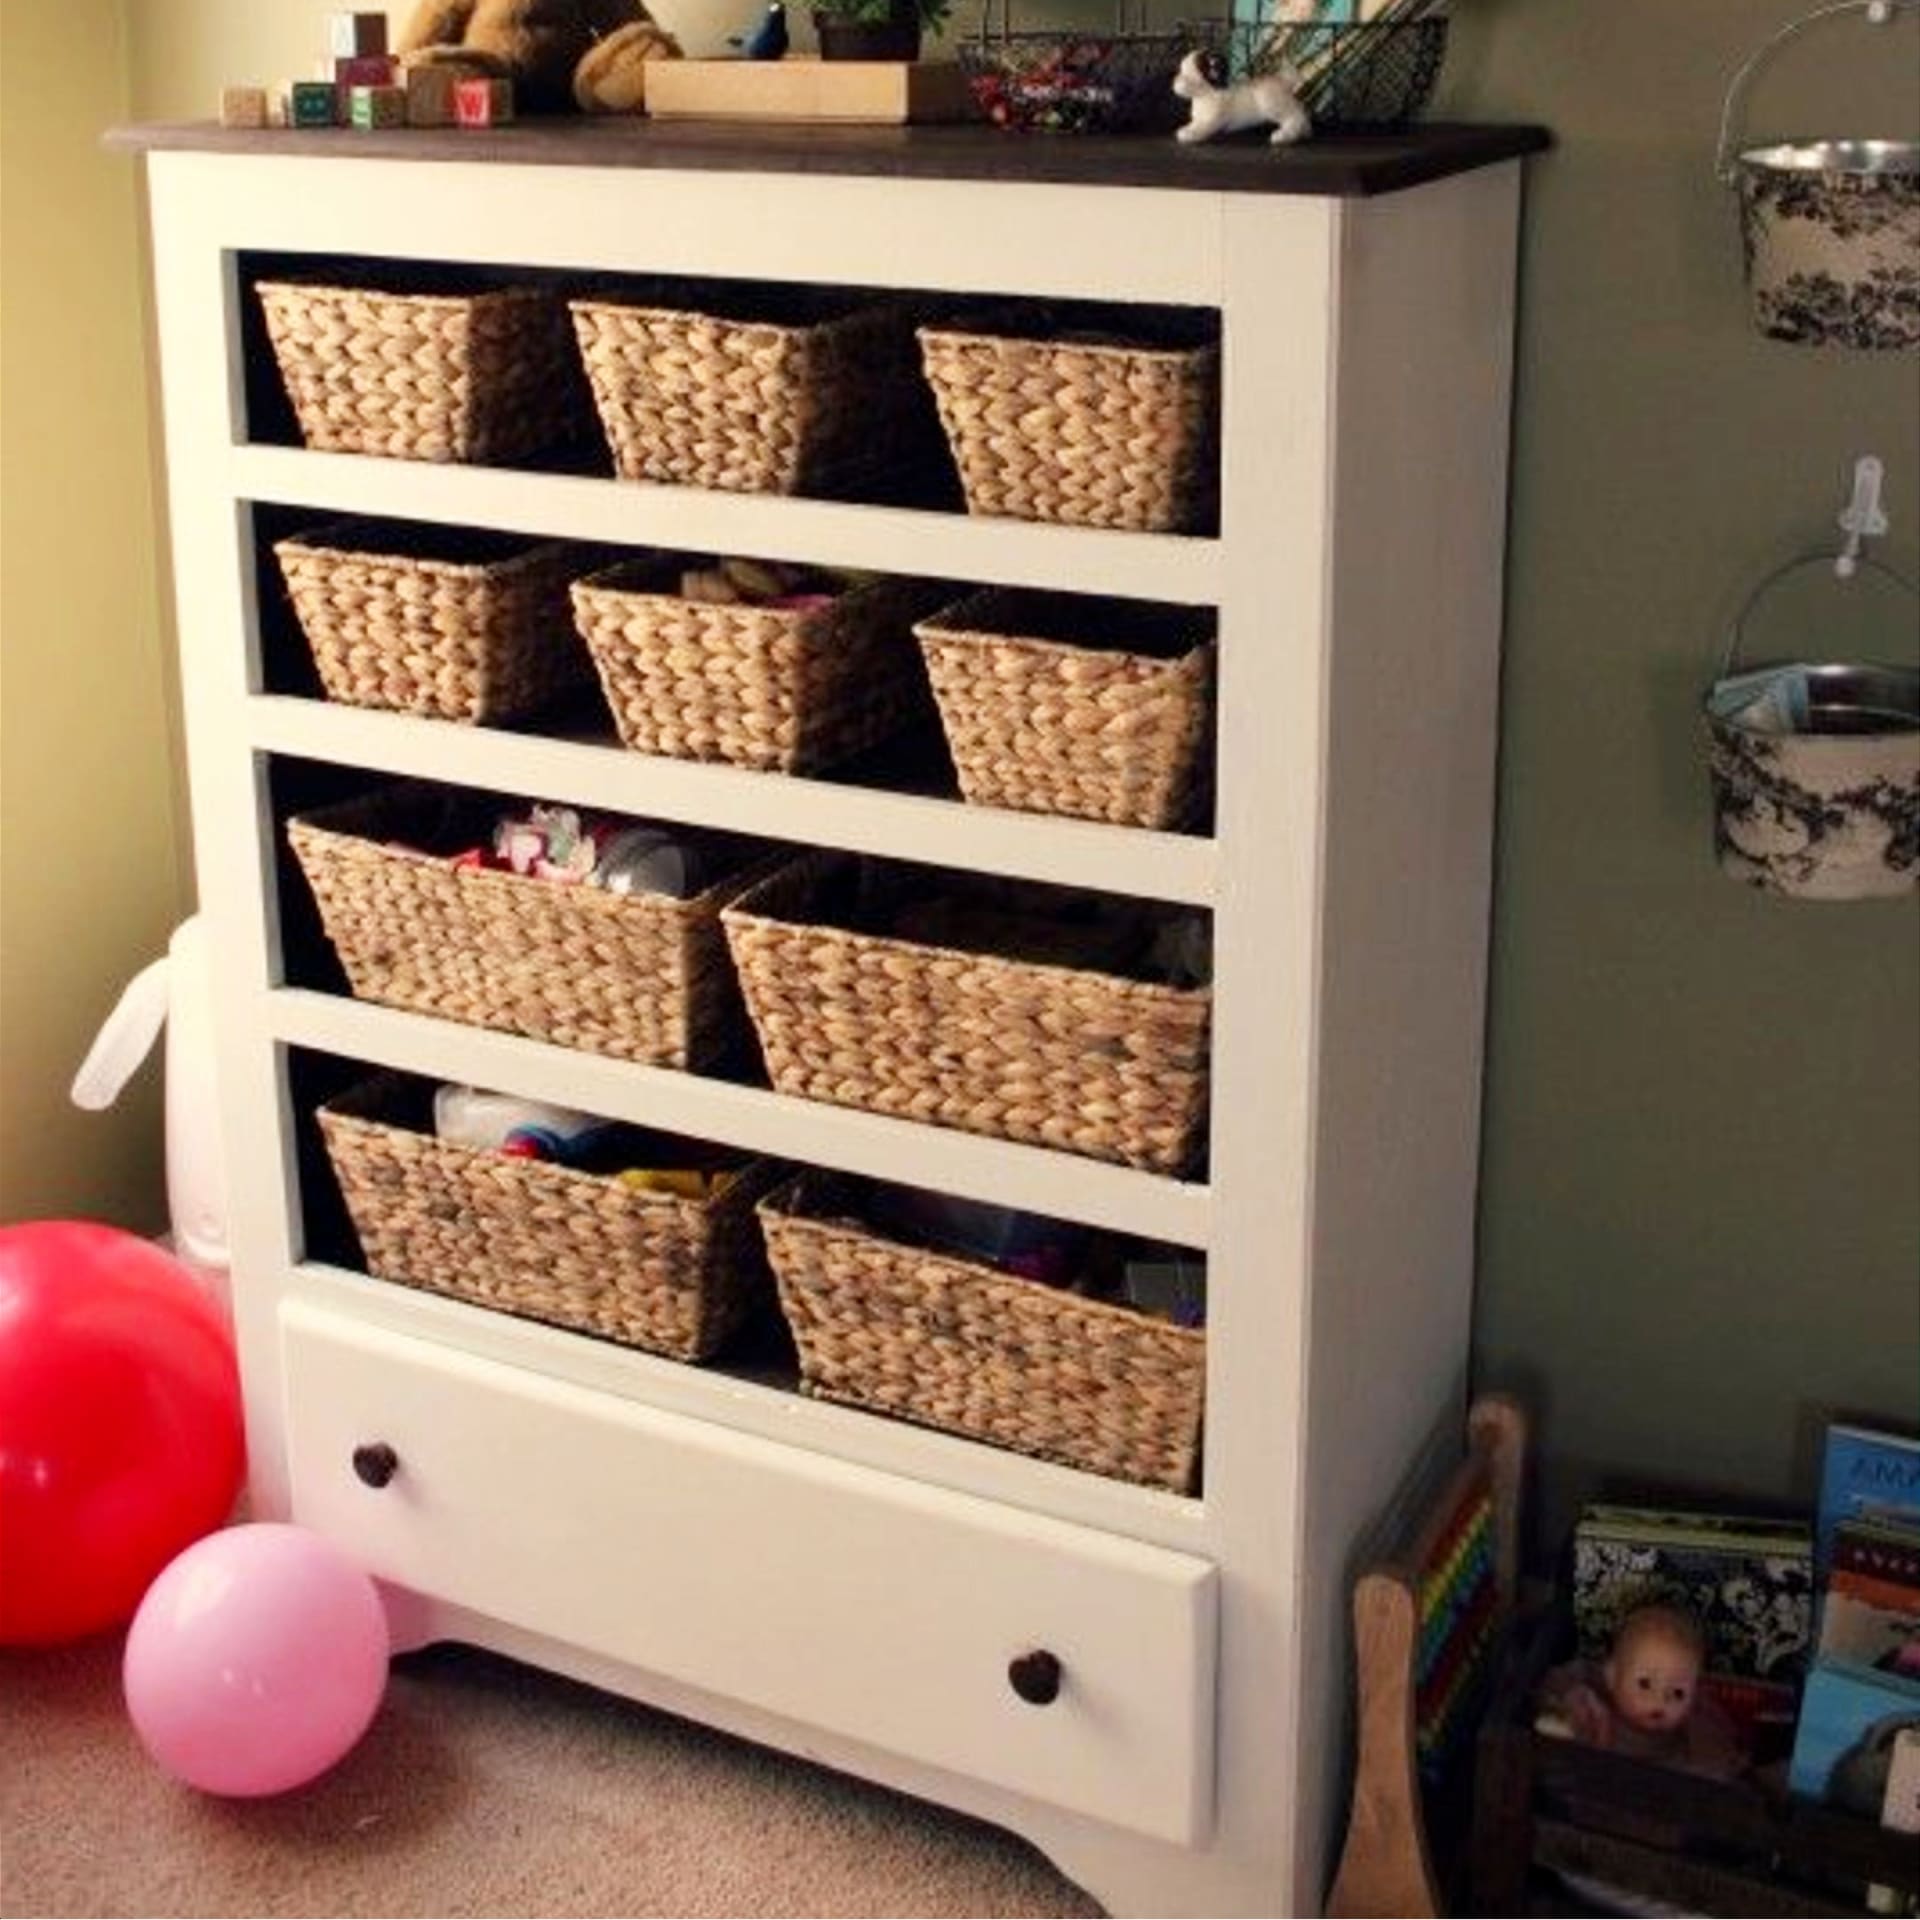 Thrift store repurposed furniture projects and ideas - repurposed dresser into a beautiful storage cabinet with baskets for the kids room or baby bedroom nursery.  Cheap repurposed furniture ideas